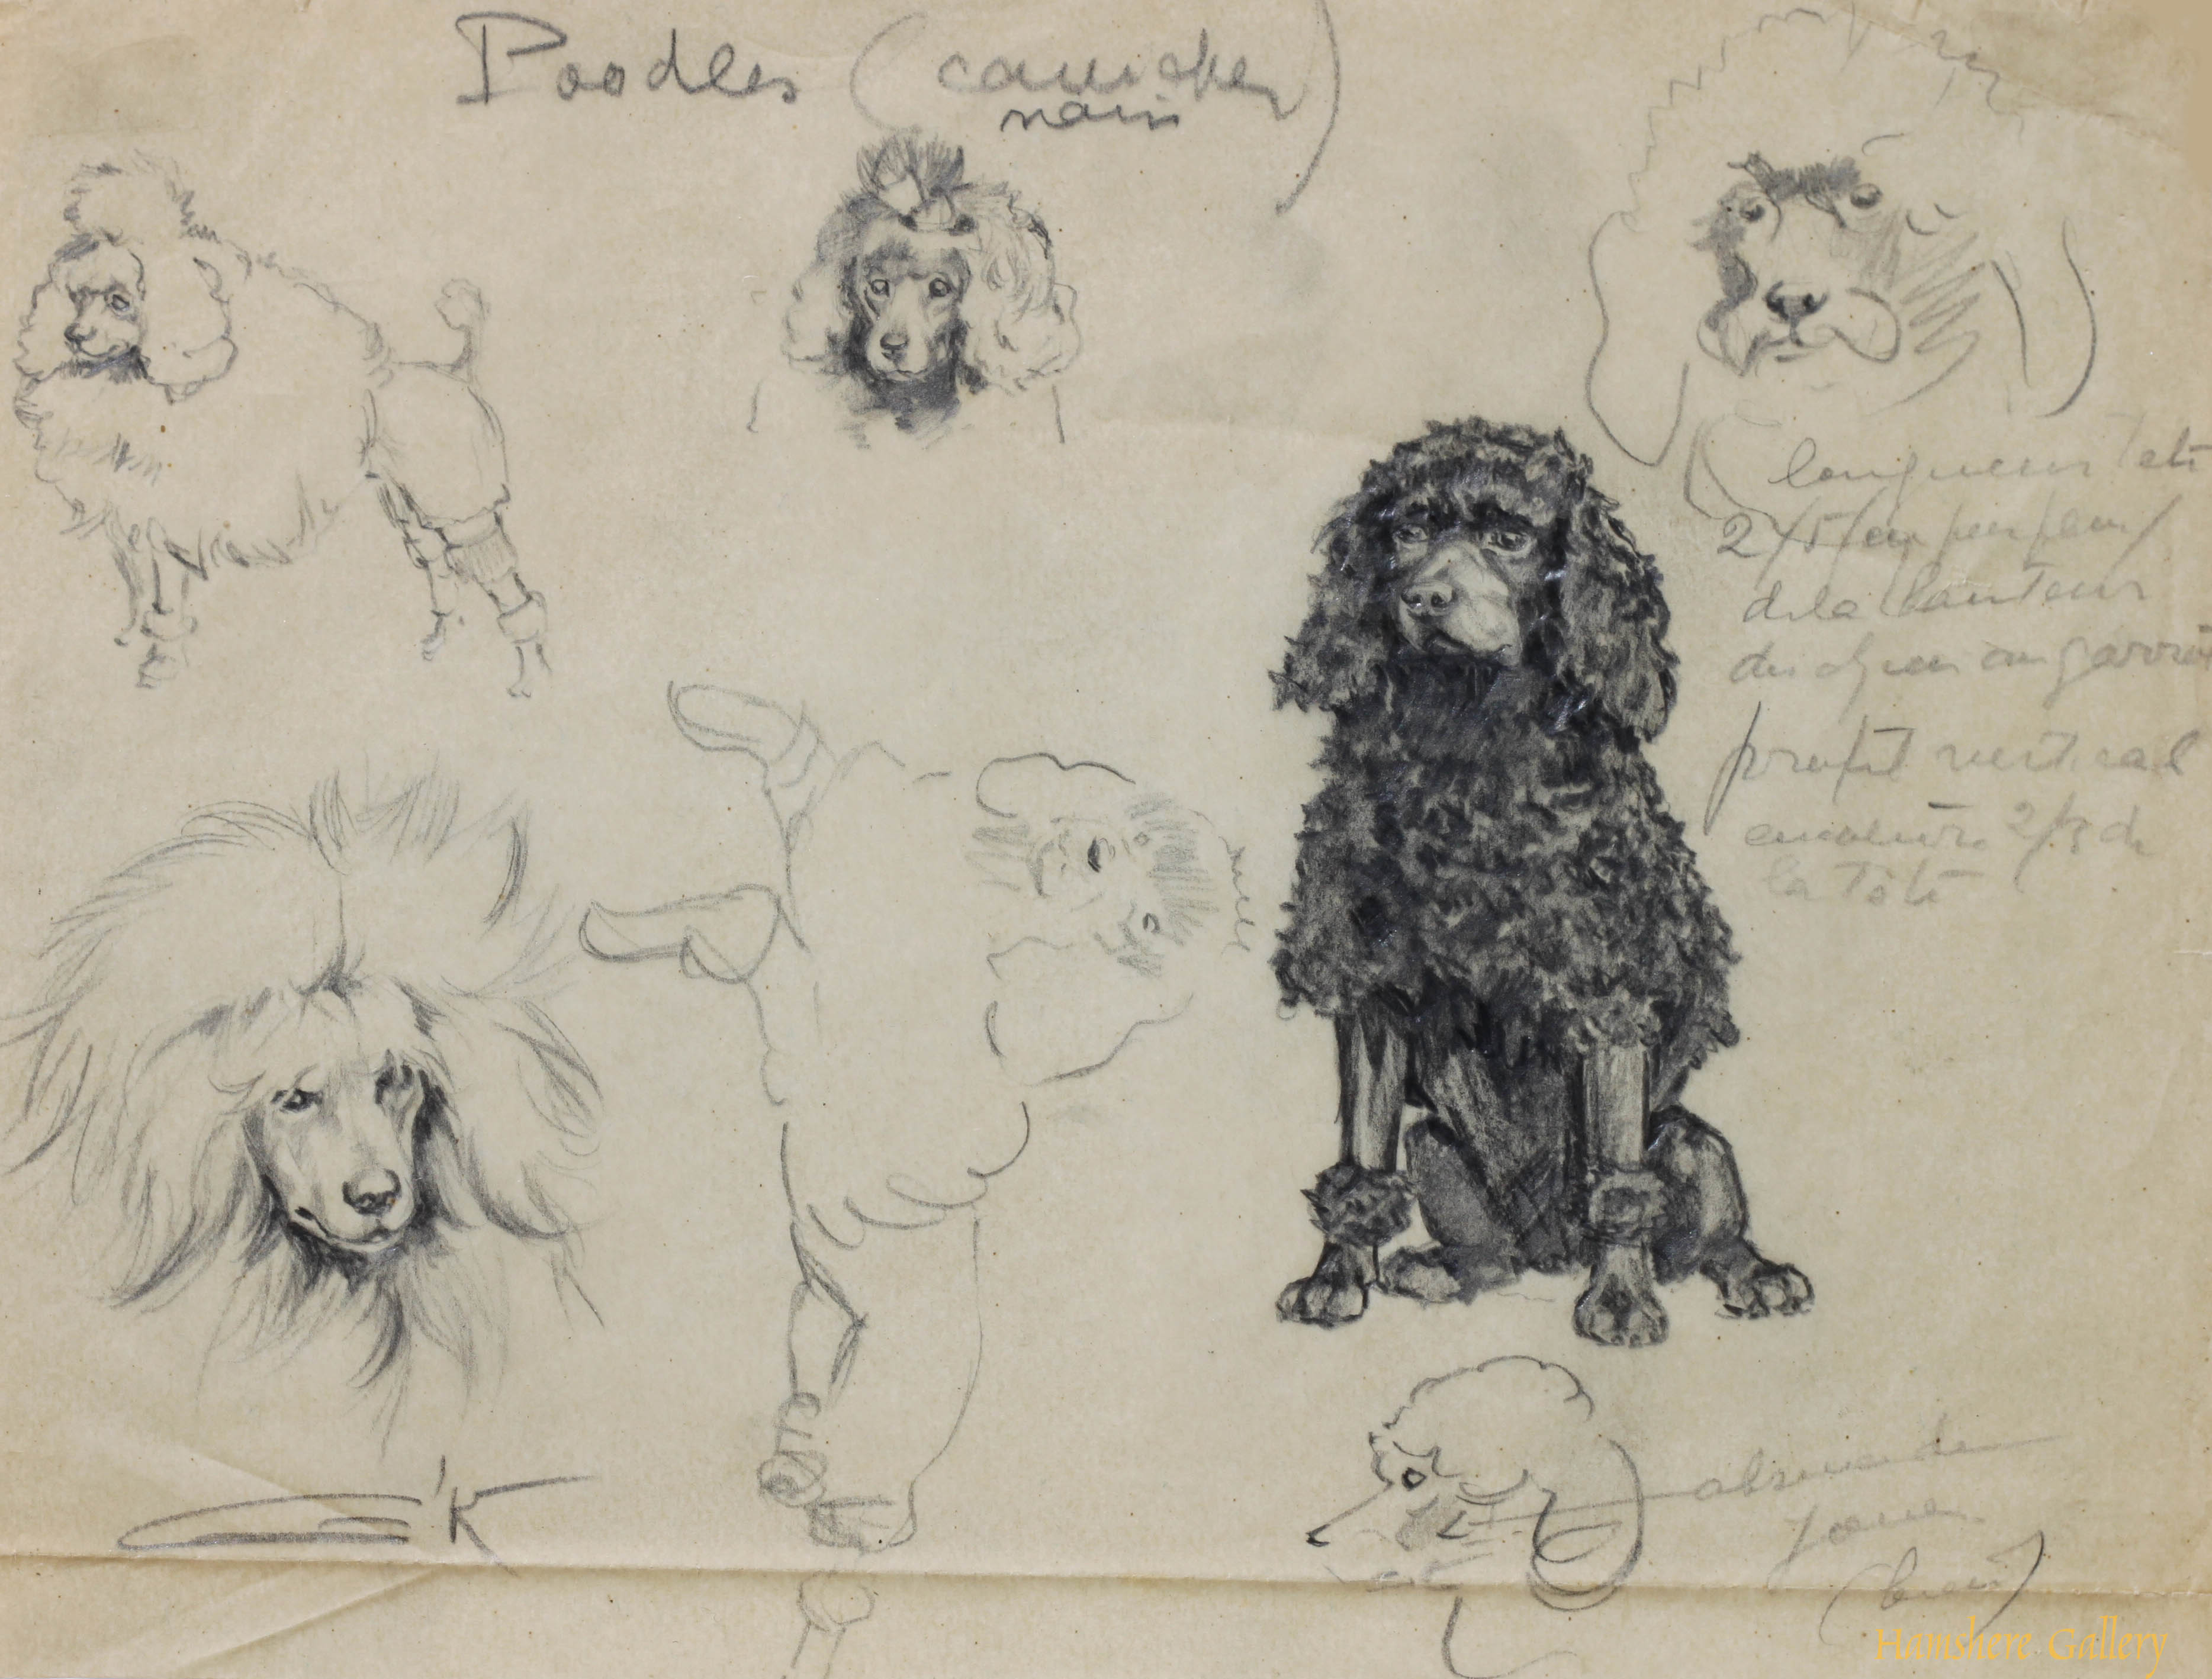 Click to see full size: Poodle / Cainche pencil studies by Borris O’Klein / Jean Herblet 